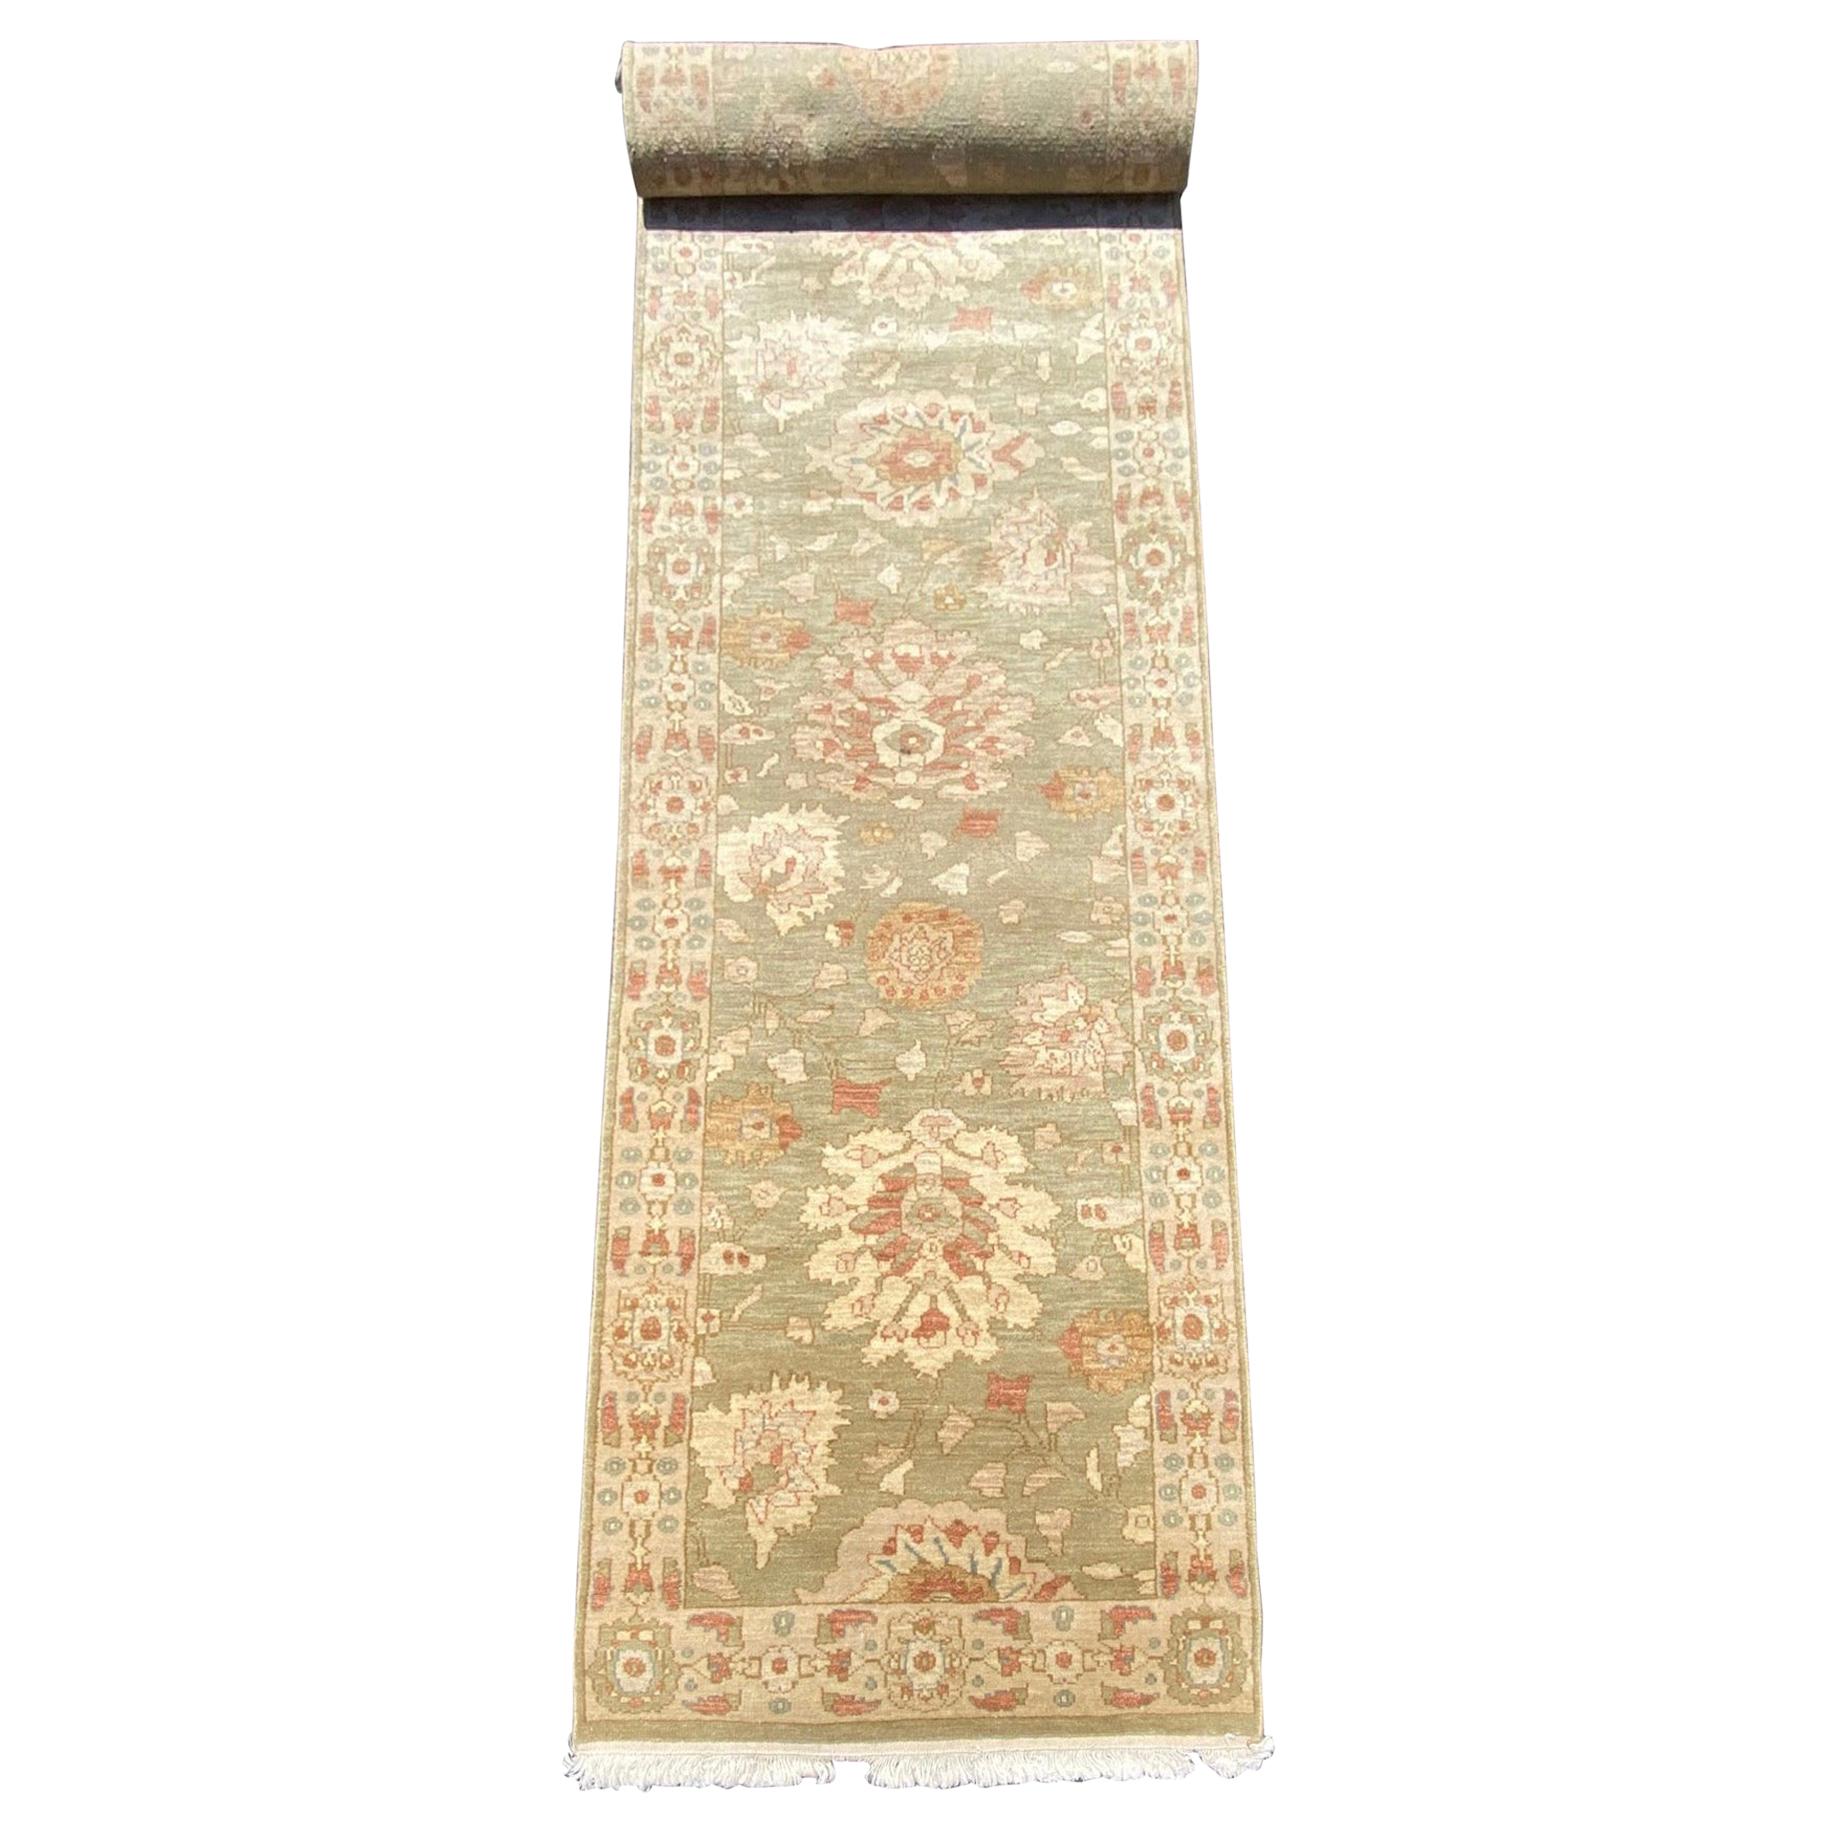 New Green Ivory Floral Persian Style Narrow Runner Rug 3 x 10.3 ft.